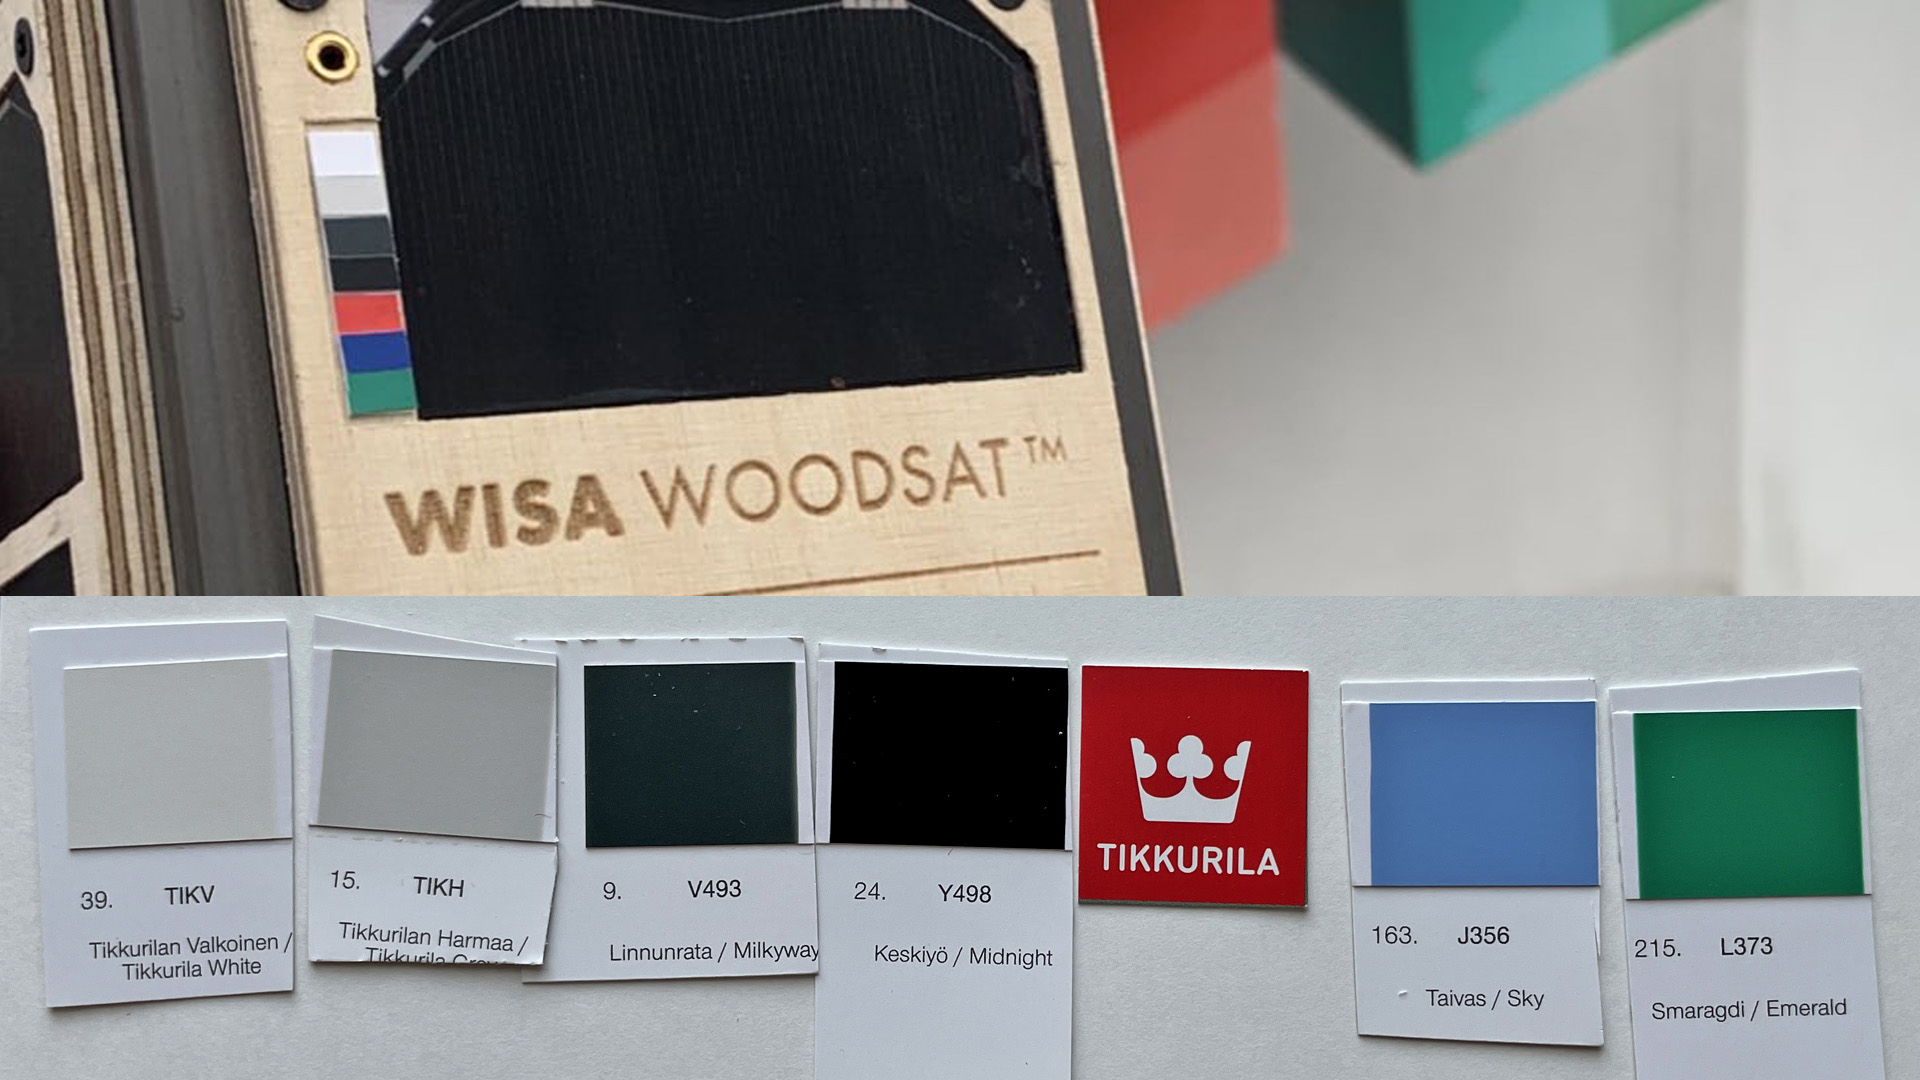 A evaluation version of the colour calibration card was already in the test model.